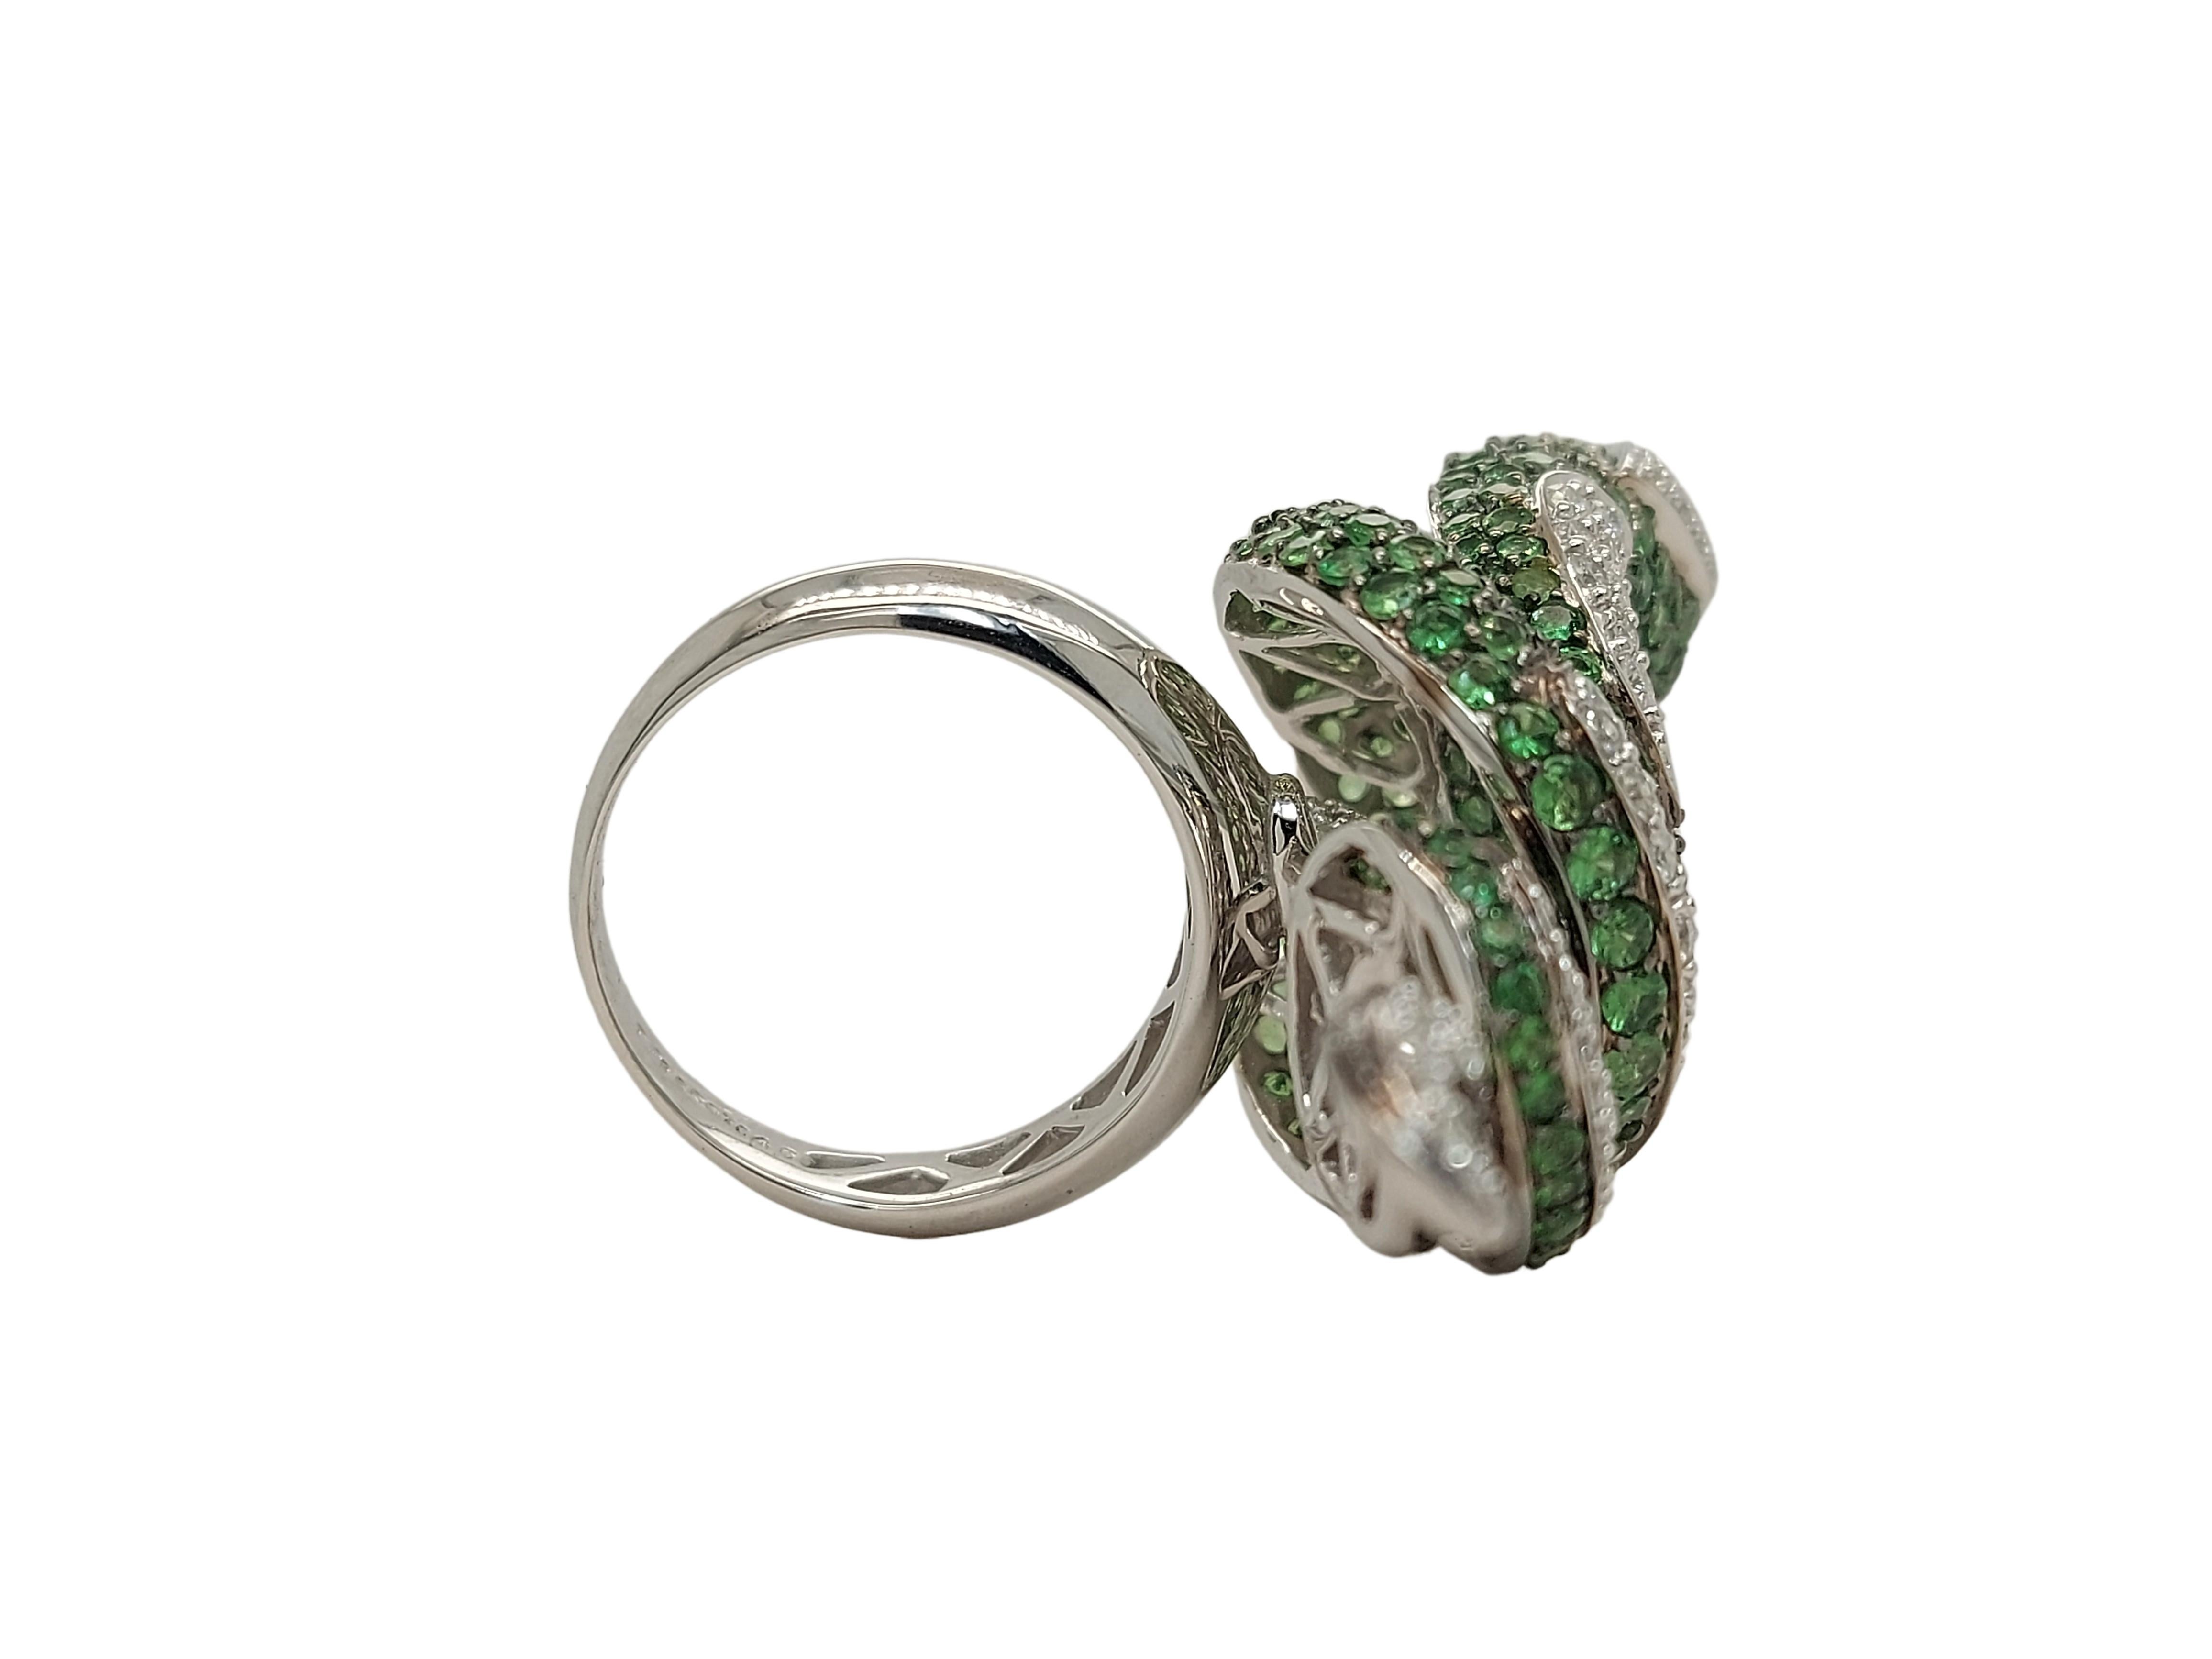 Emerald Cut Fabulous Twirl Snake Ring in 18kt White Gold Set with Diamonds, Tsavorite, Ruby For Sale